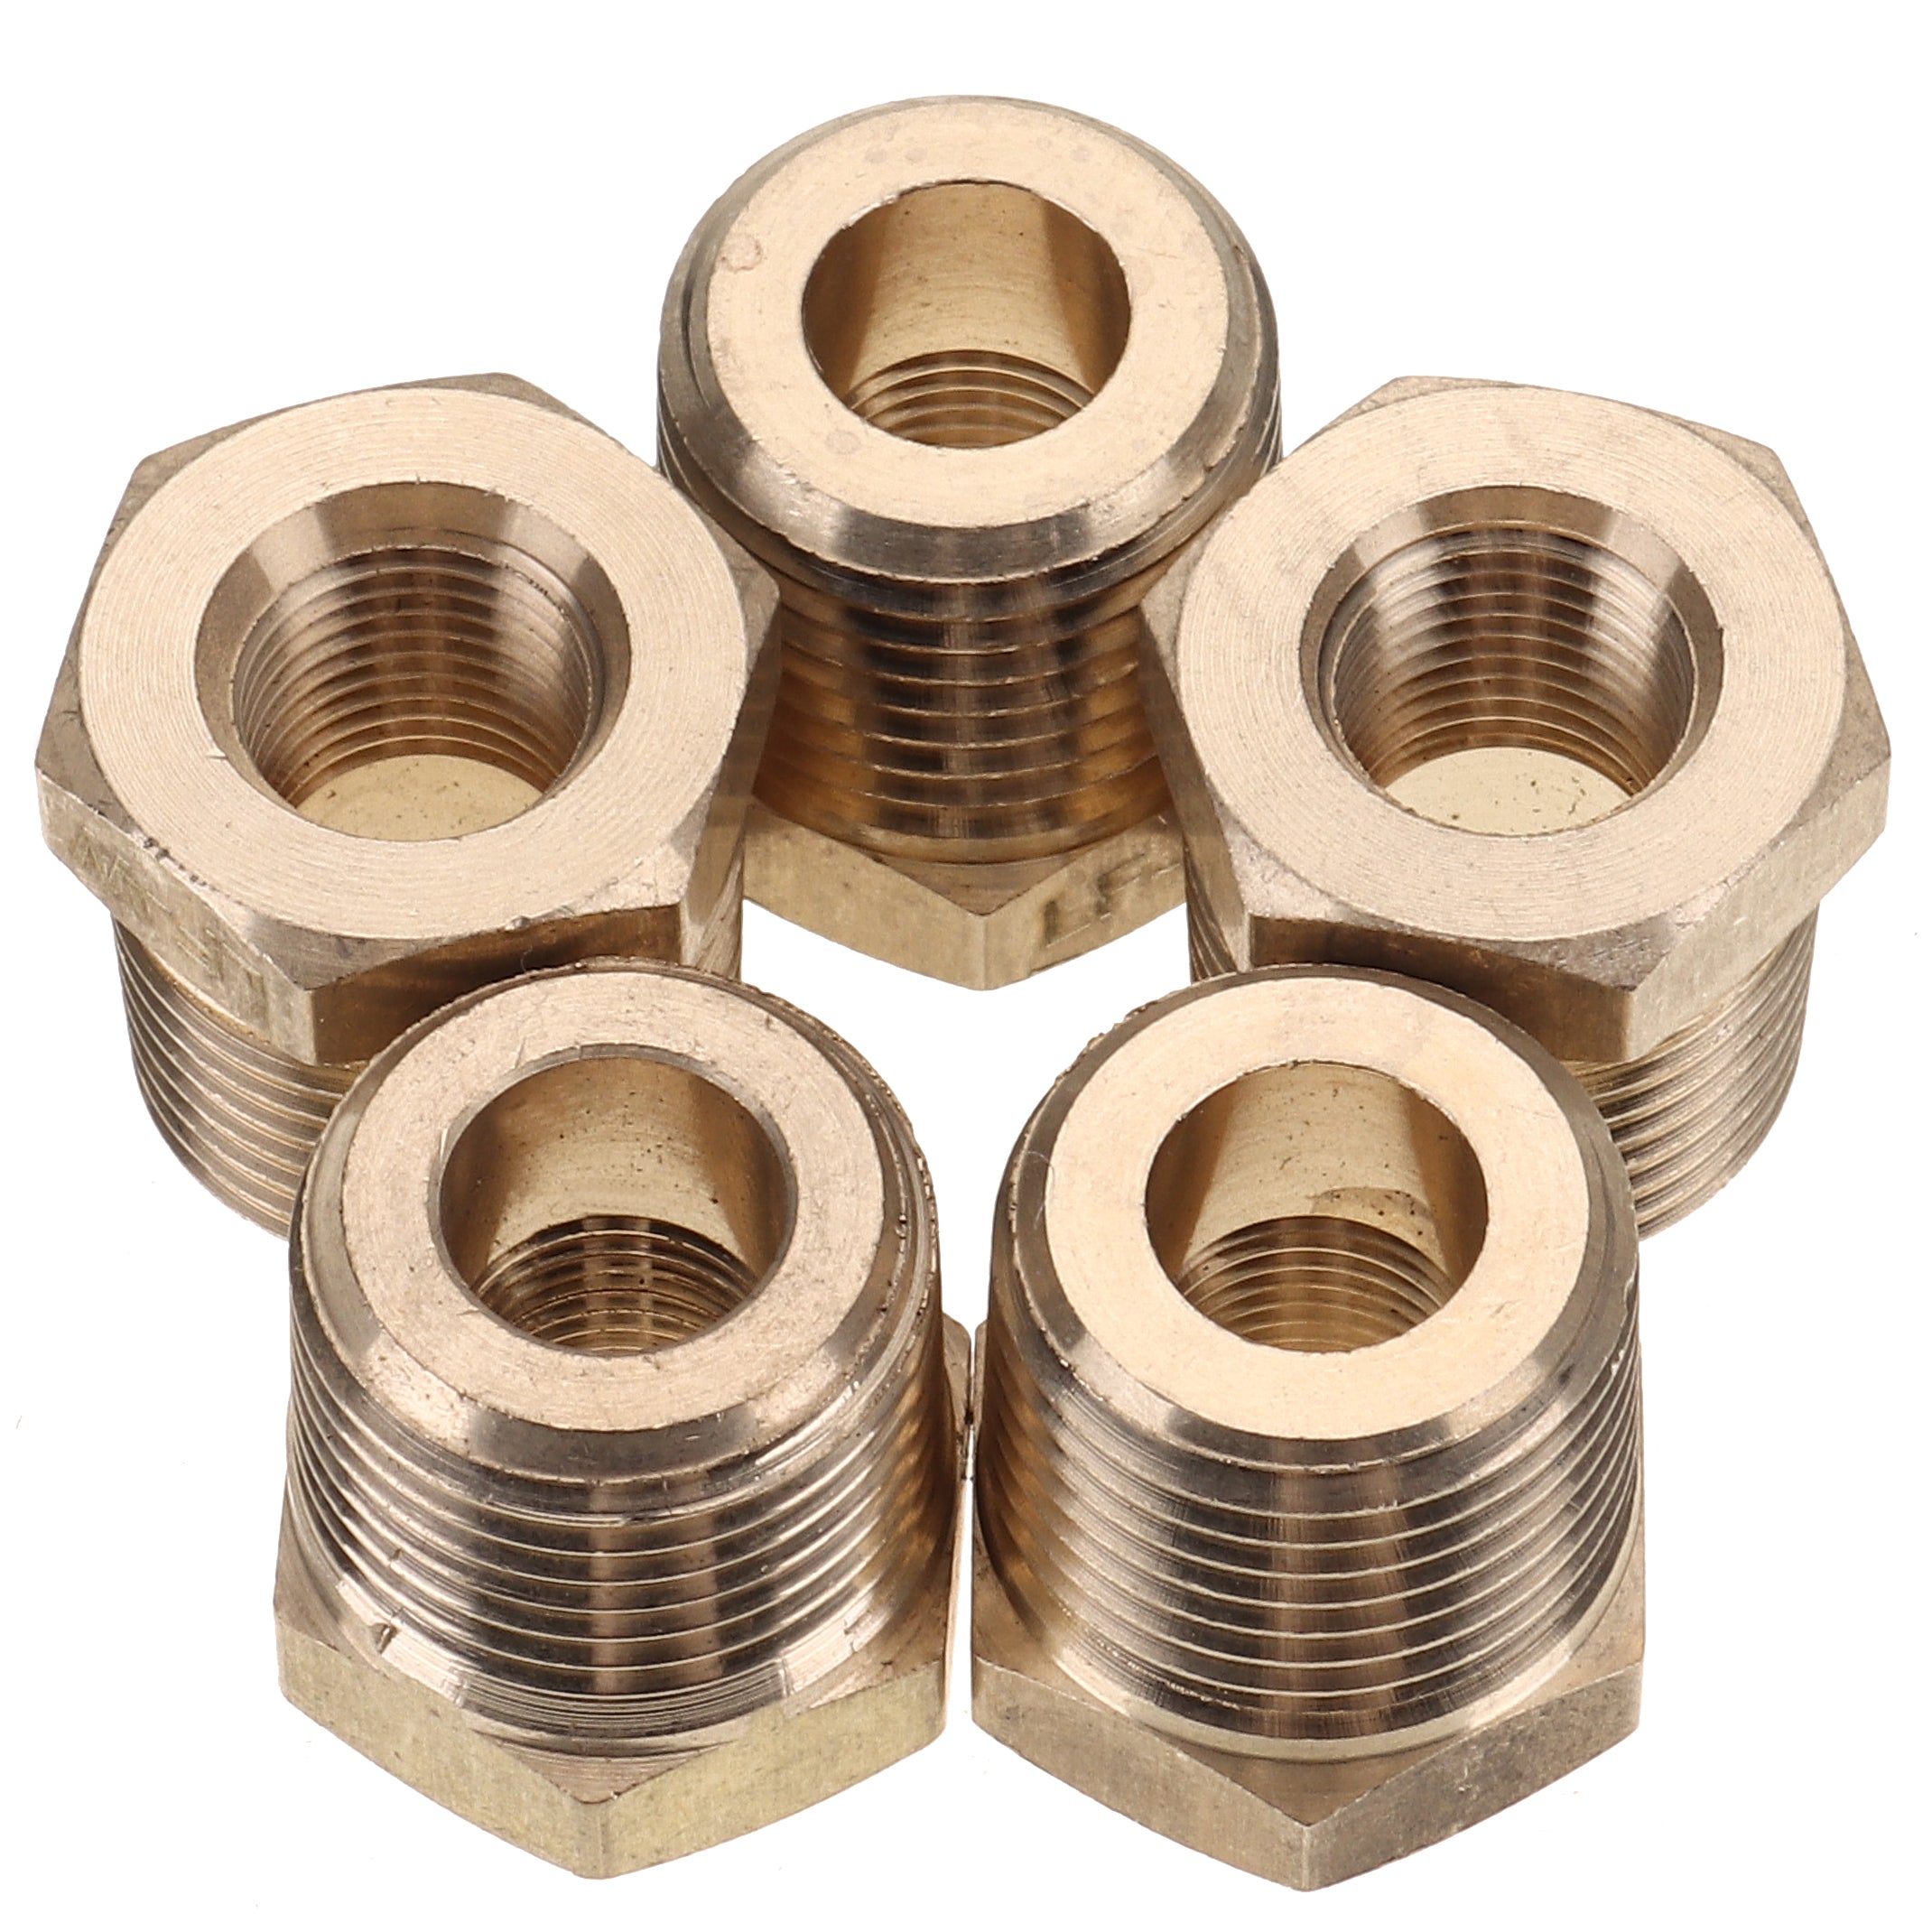 LTWFITTING Lead Free Brass Hex Pipe Bushing Reducer Fittings 3/8 Inch Male x 1/8 Inch Female NPT (Pack of 5)